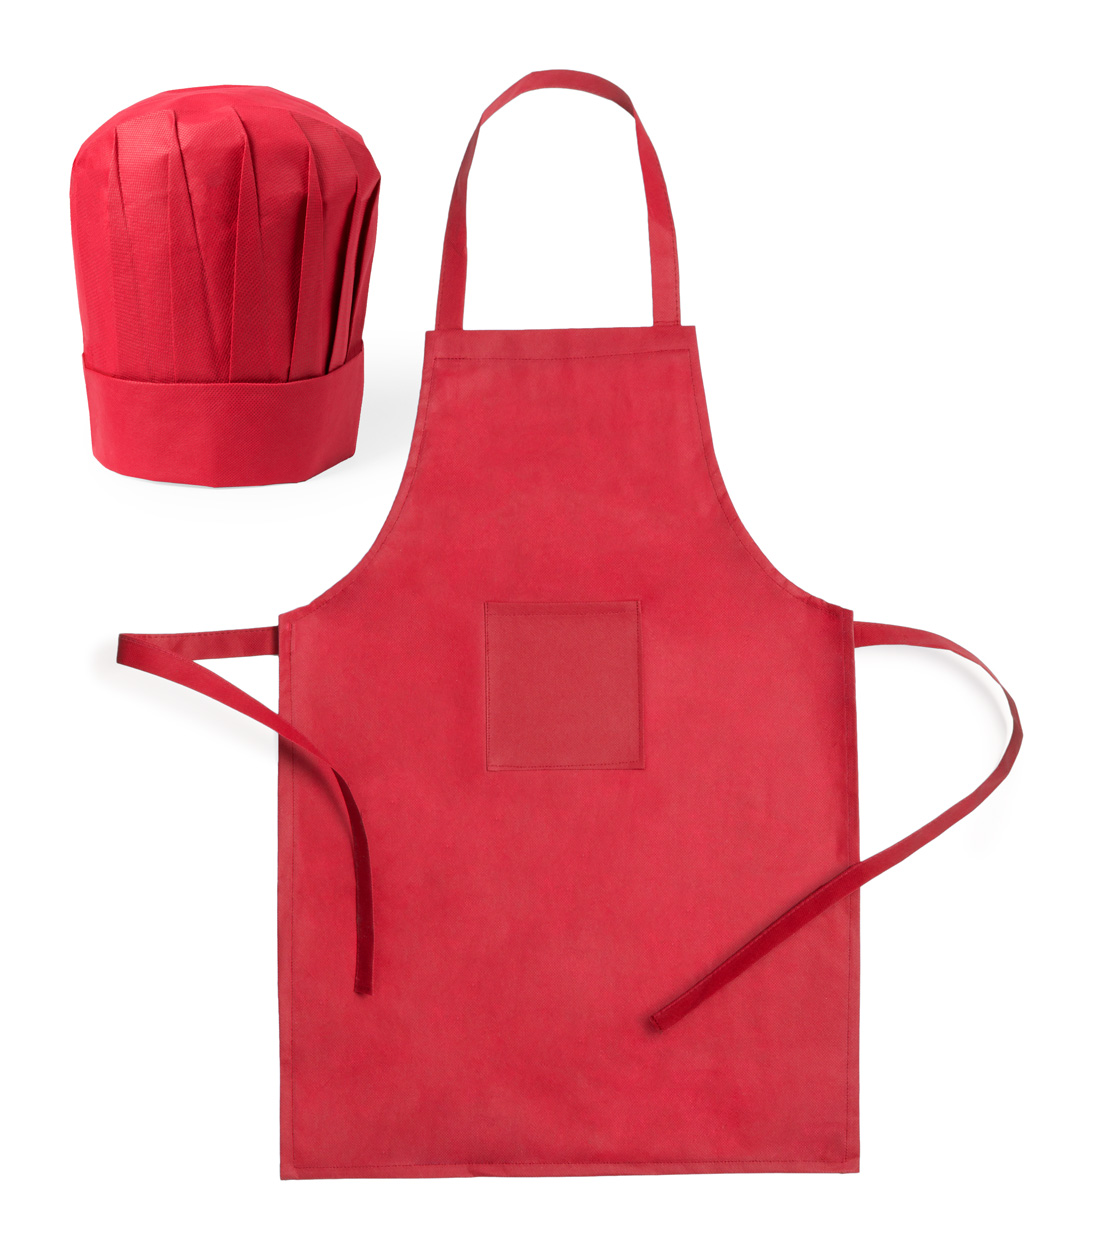 Children's cooking set LEGOX with hat and apron